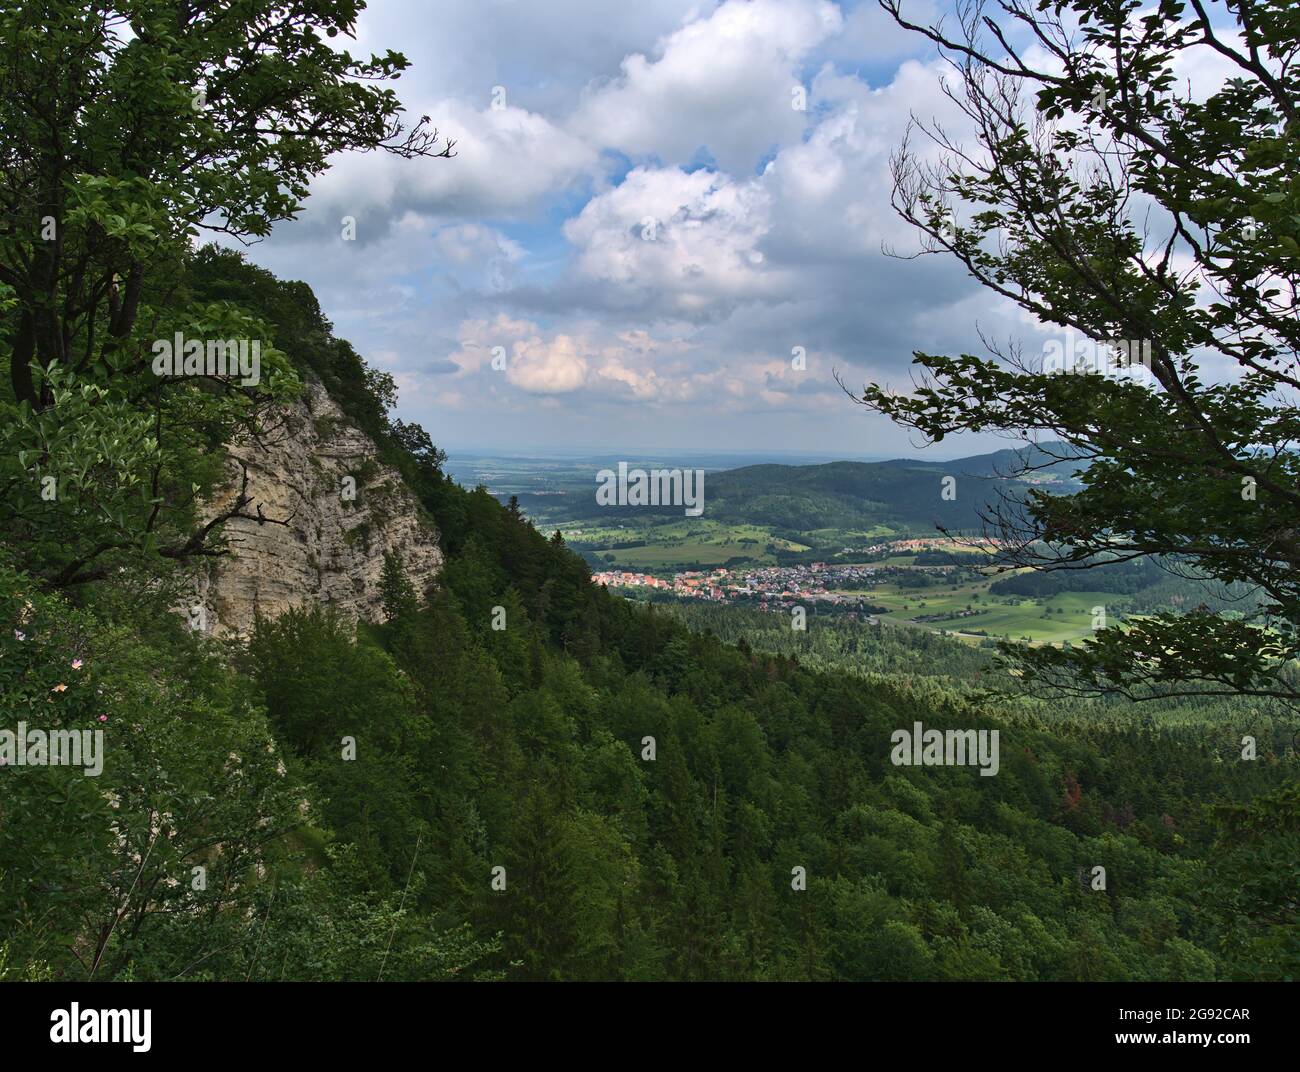 Rock face at the edge ('Albtrauf') of low mountain range Swabian Alb viewed through trees with green forests and the eastern part of town Balingen. Stock Photo